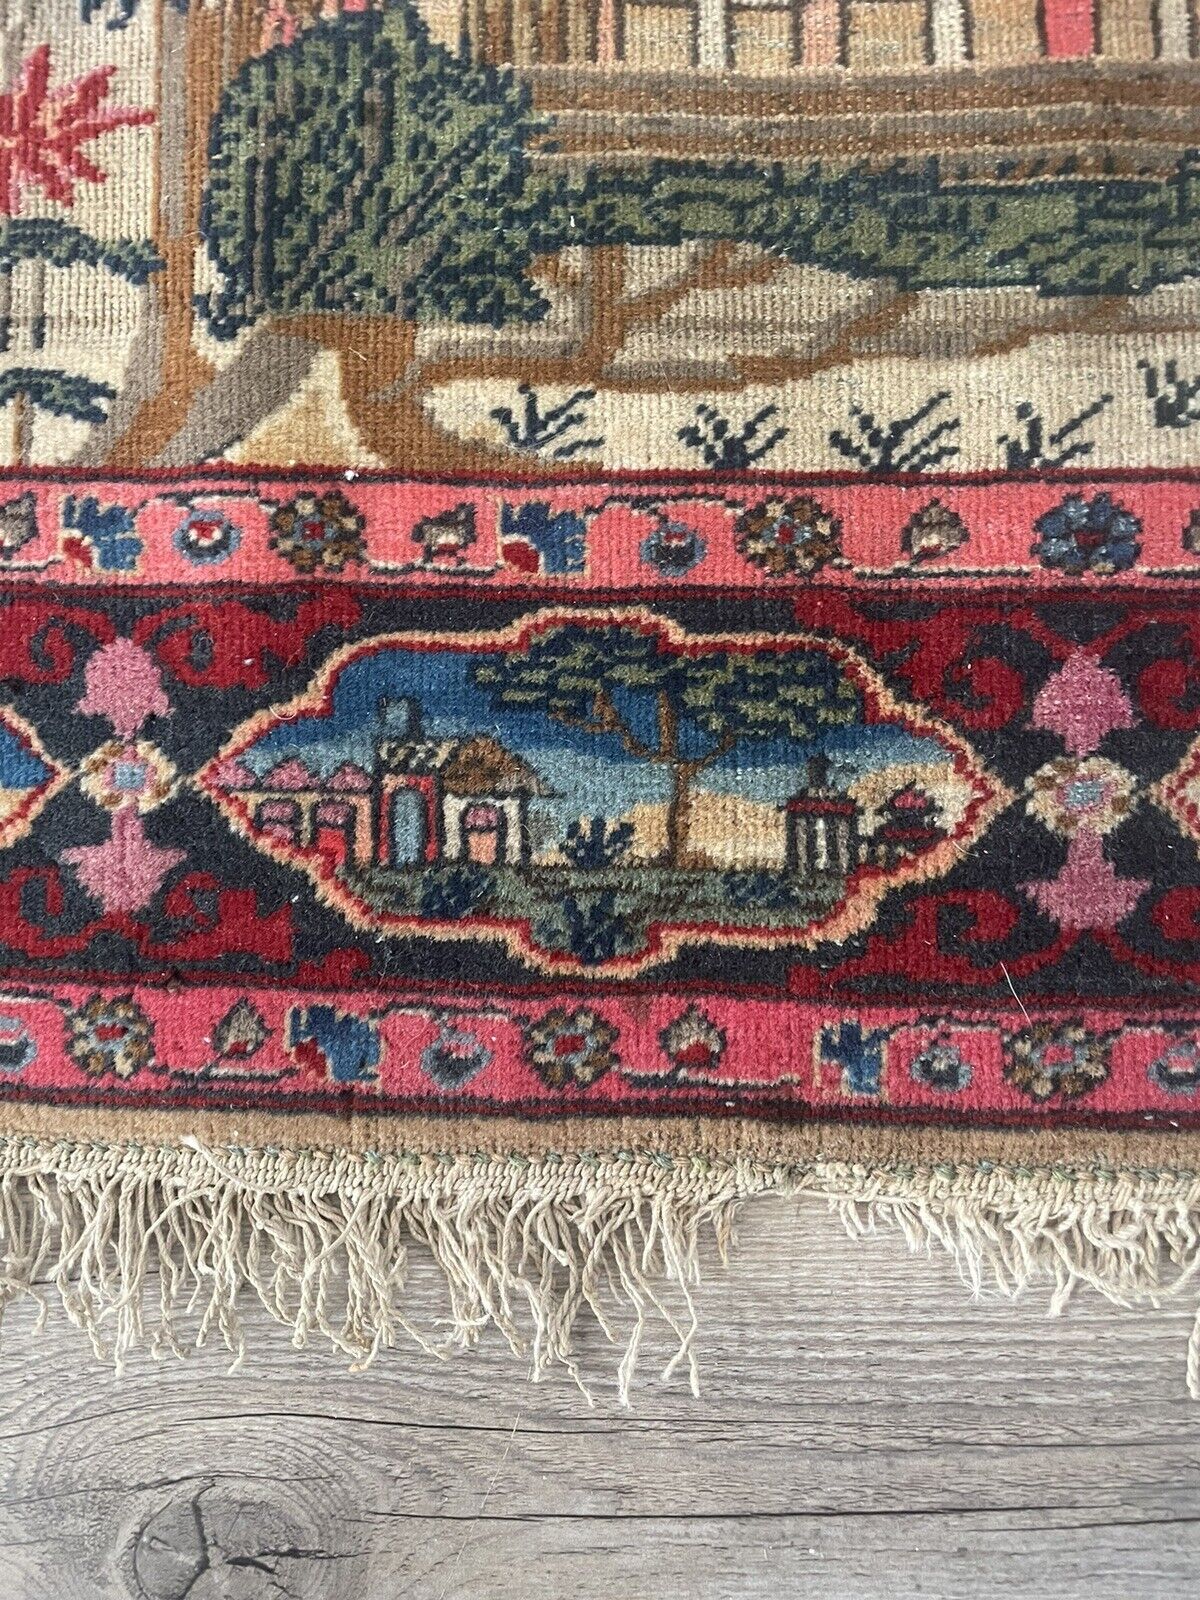 Close-up of tree of life motif on Handmade Antique Persian Kashan Collectible Rug - Detailed view highlighting the central design motif, possibly depicting a tree of life symbolizing fertility, growth, and connection to the divine.